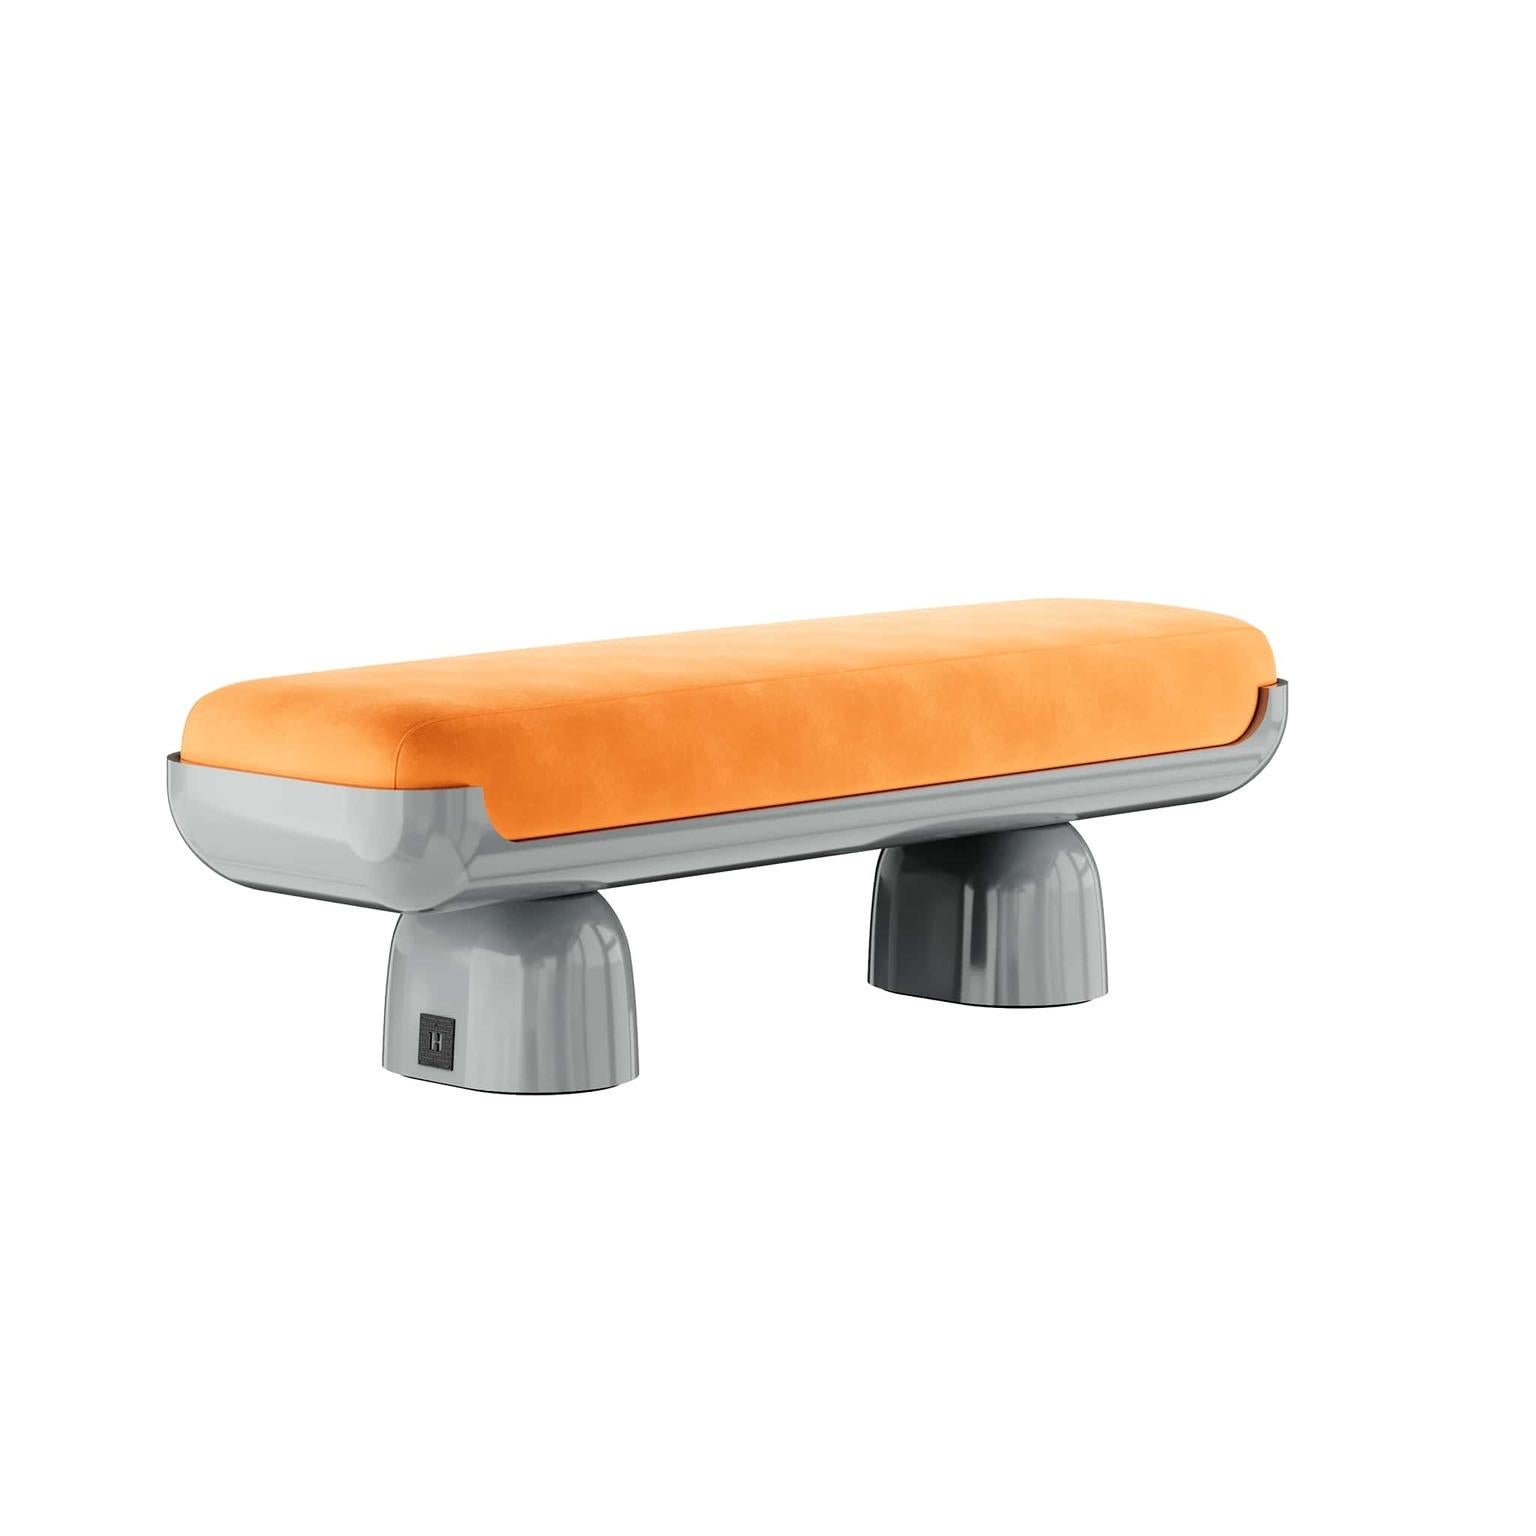 21st Century Contemporary Minimal Orange velvet bench with Grey Lacquered Base

Fifih Bench Orange is a modern bench upholstered in a warm orange fabric that will suit any interior style, from the living room to the bedroom, entryway, or office